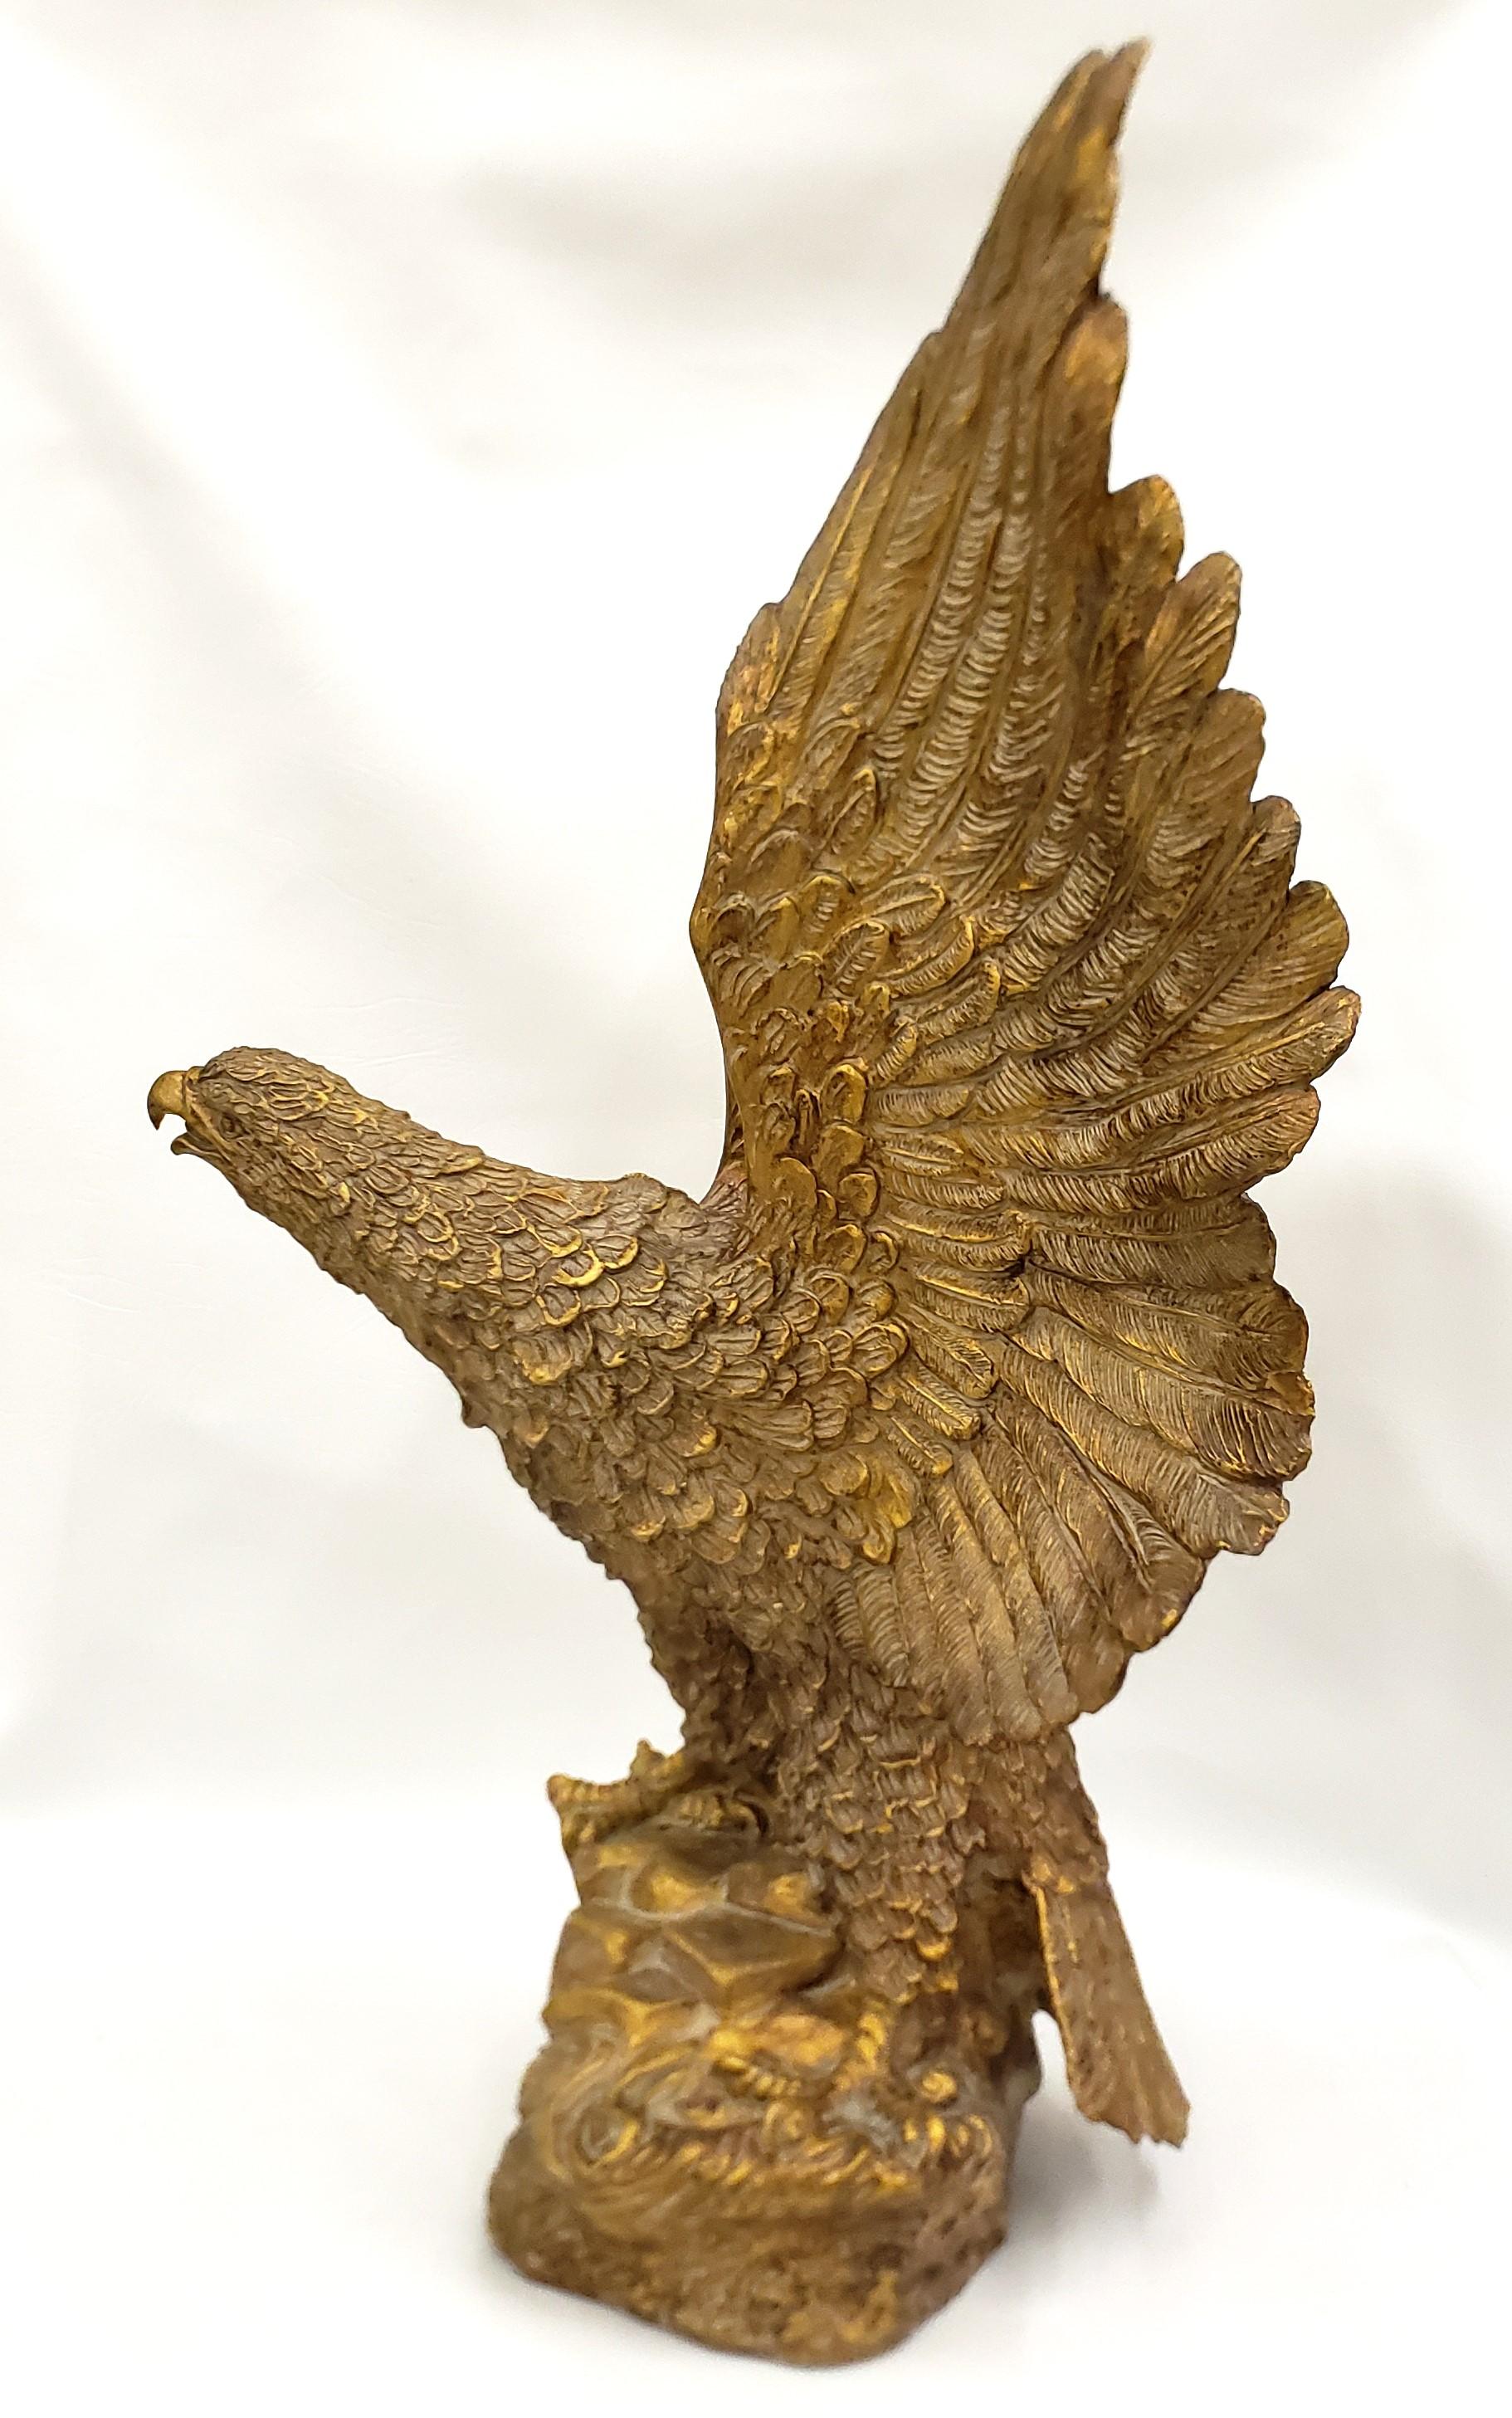 Large Detailed Italian Cast Terracotta Bald Eagle Sculpture with Gilt Finish In Good Condition For Sale In Hamilton, Ontario